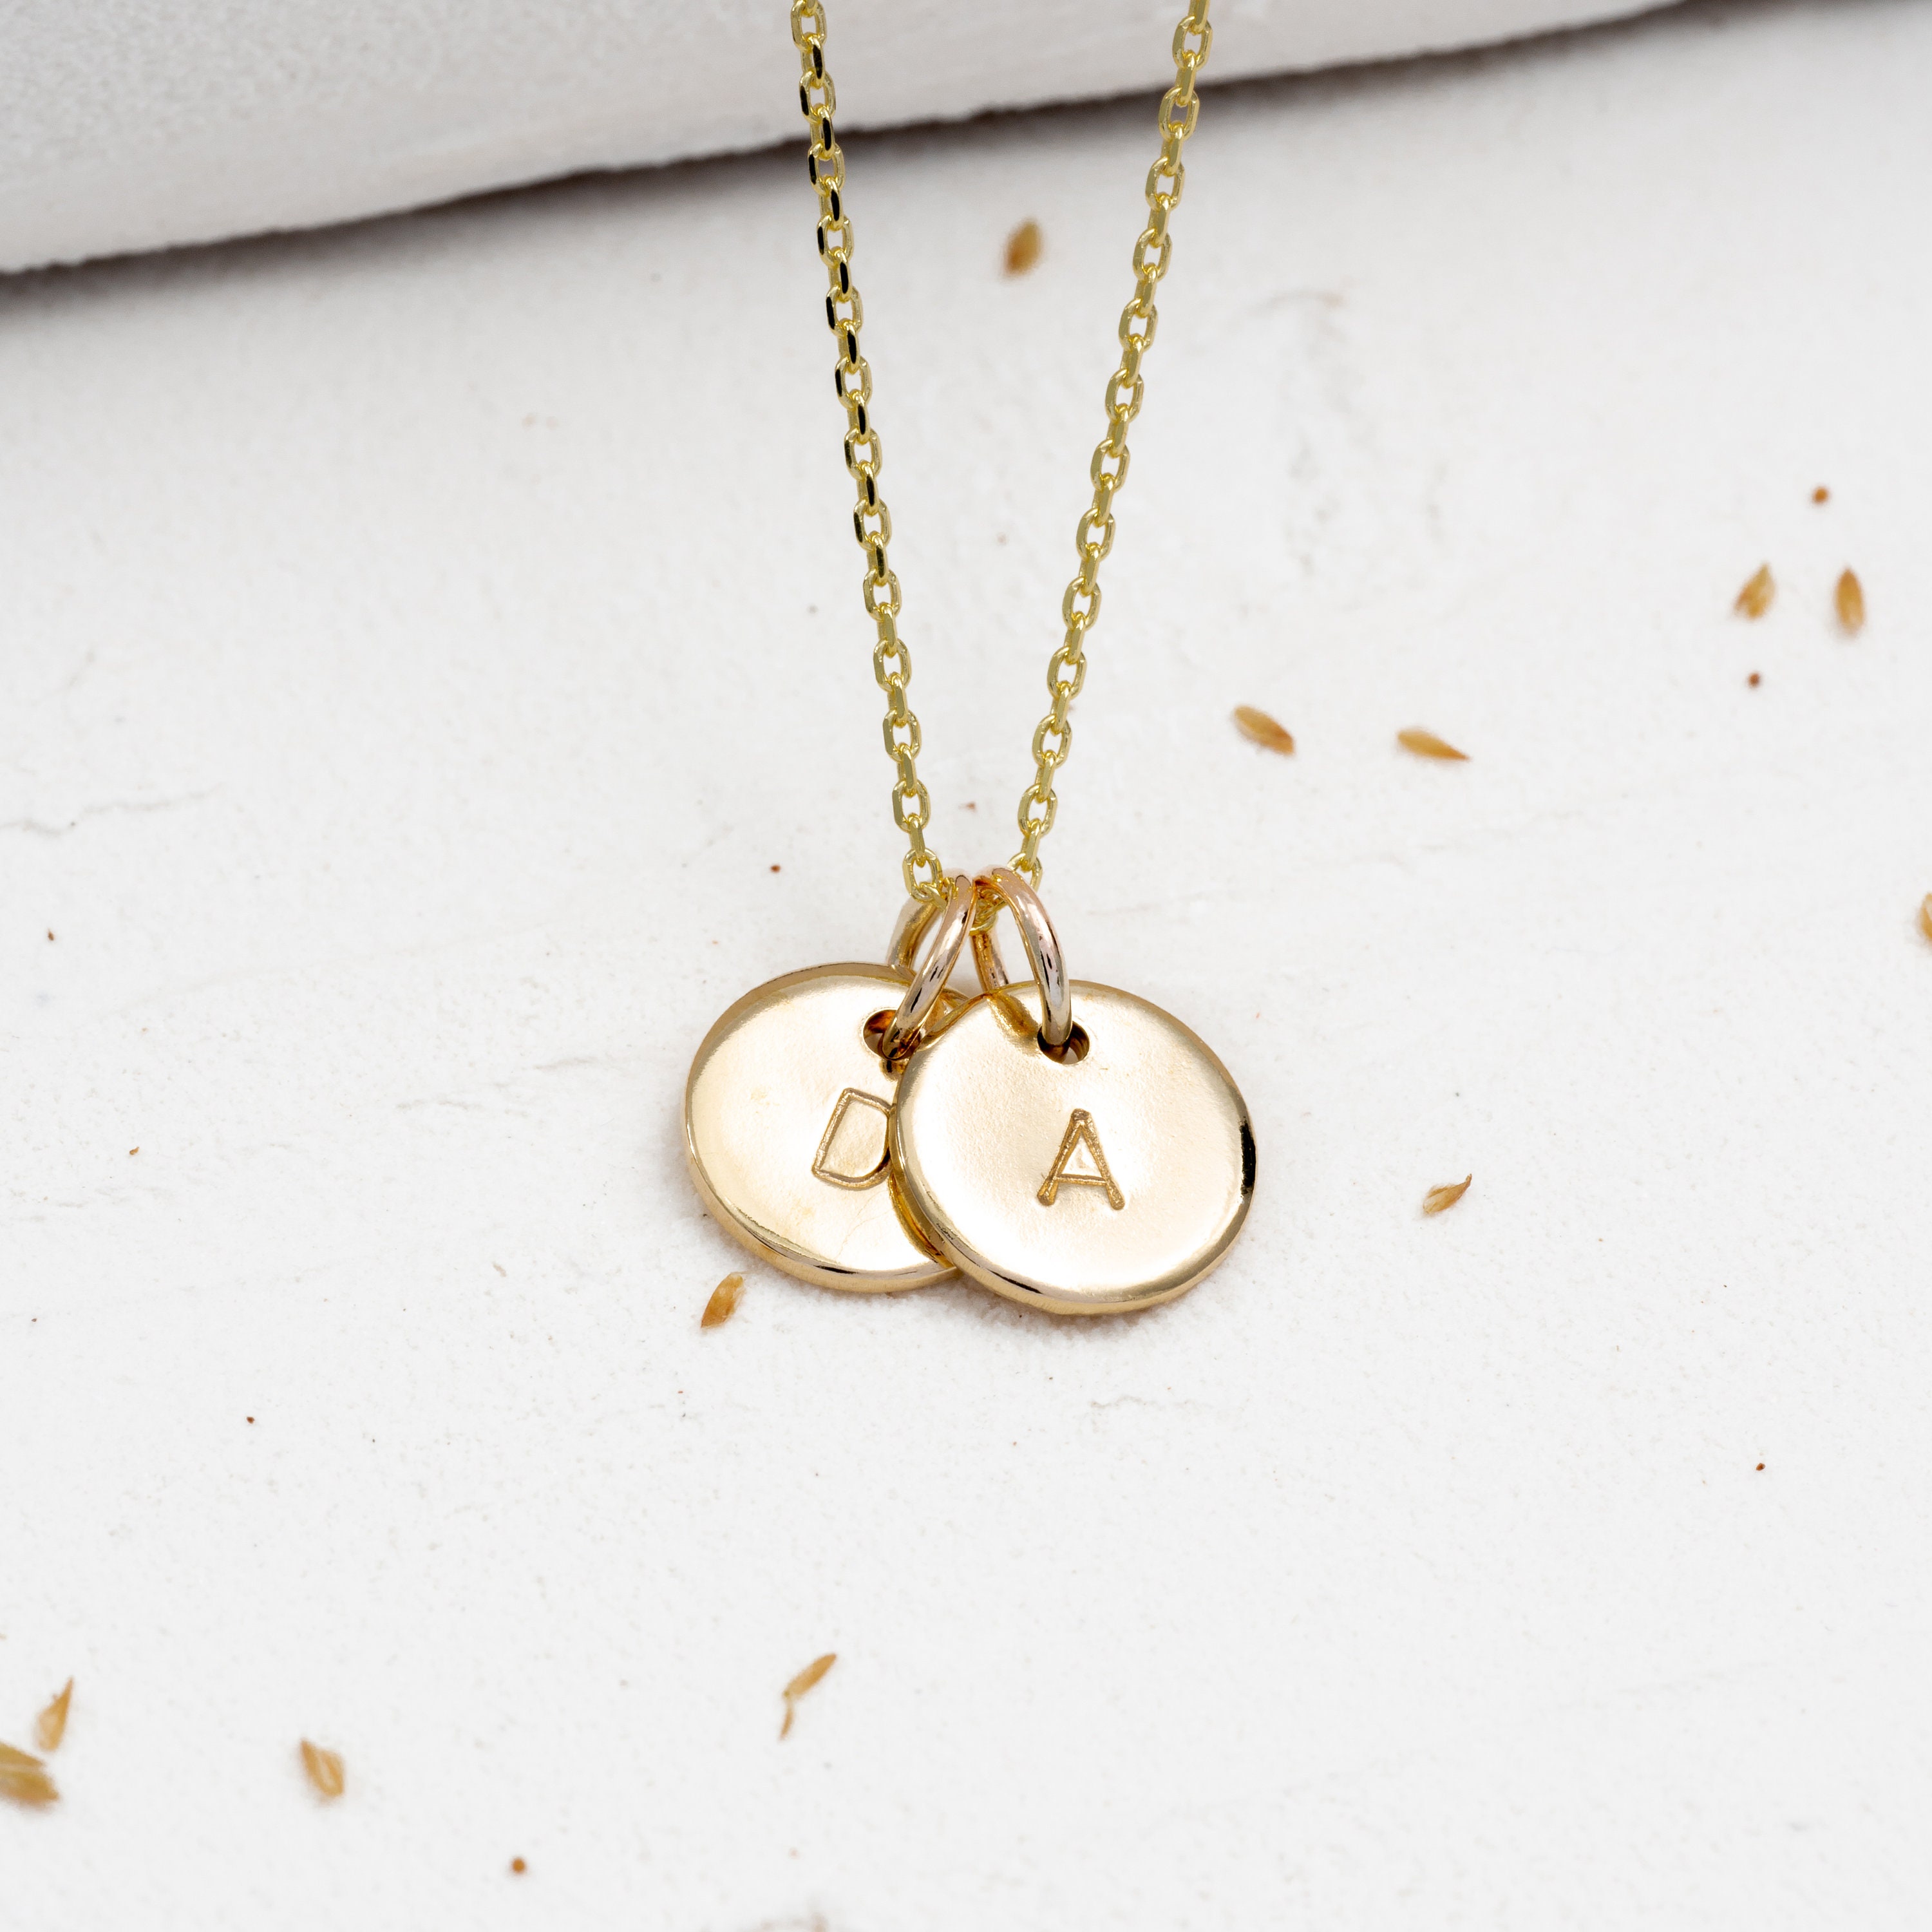 Teeny Tiny 9Ct Gold Initial Necklace - 2 Discs